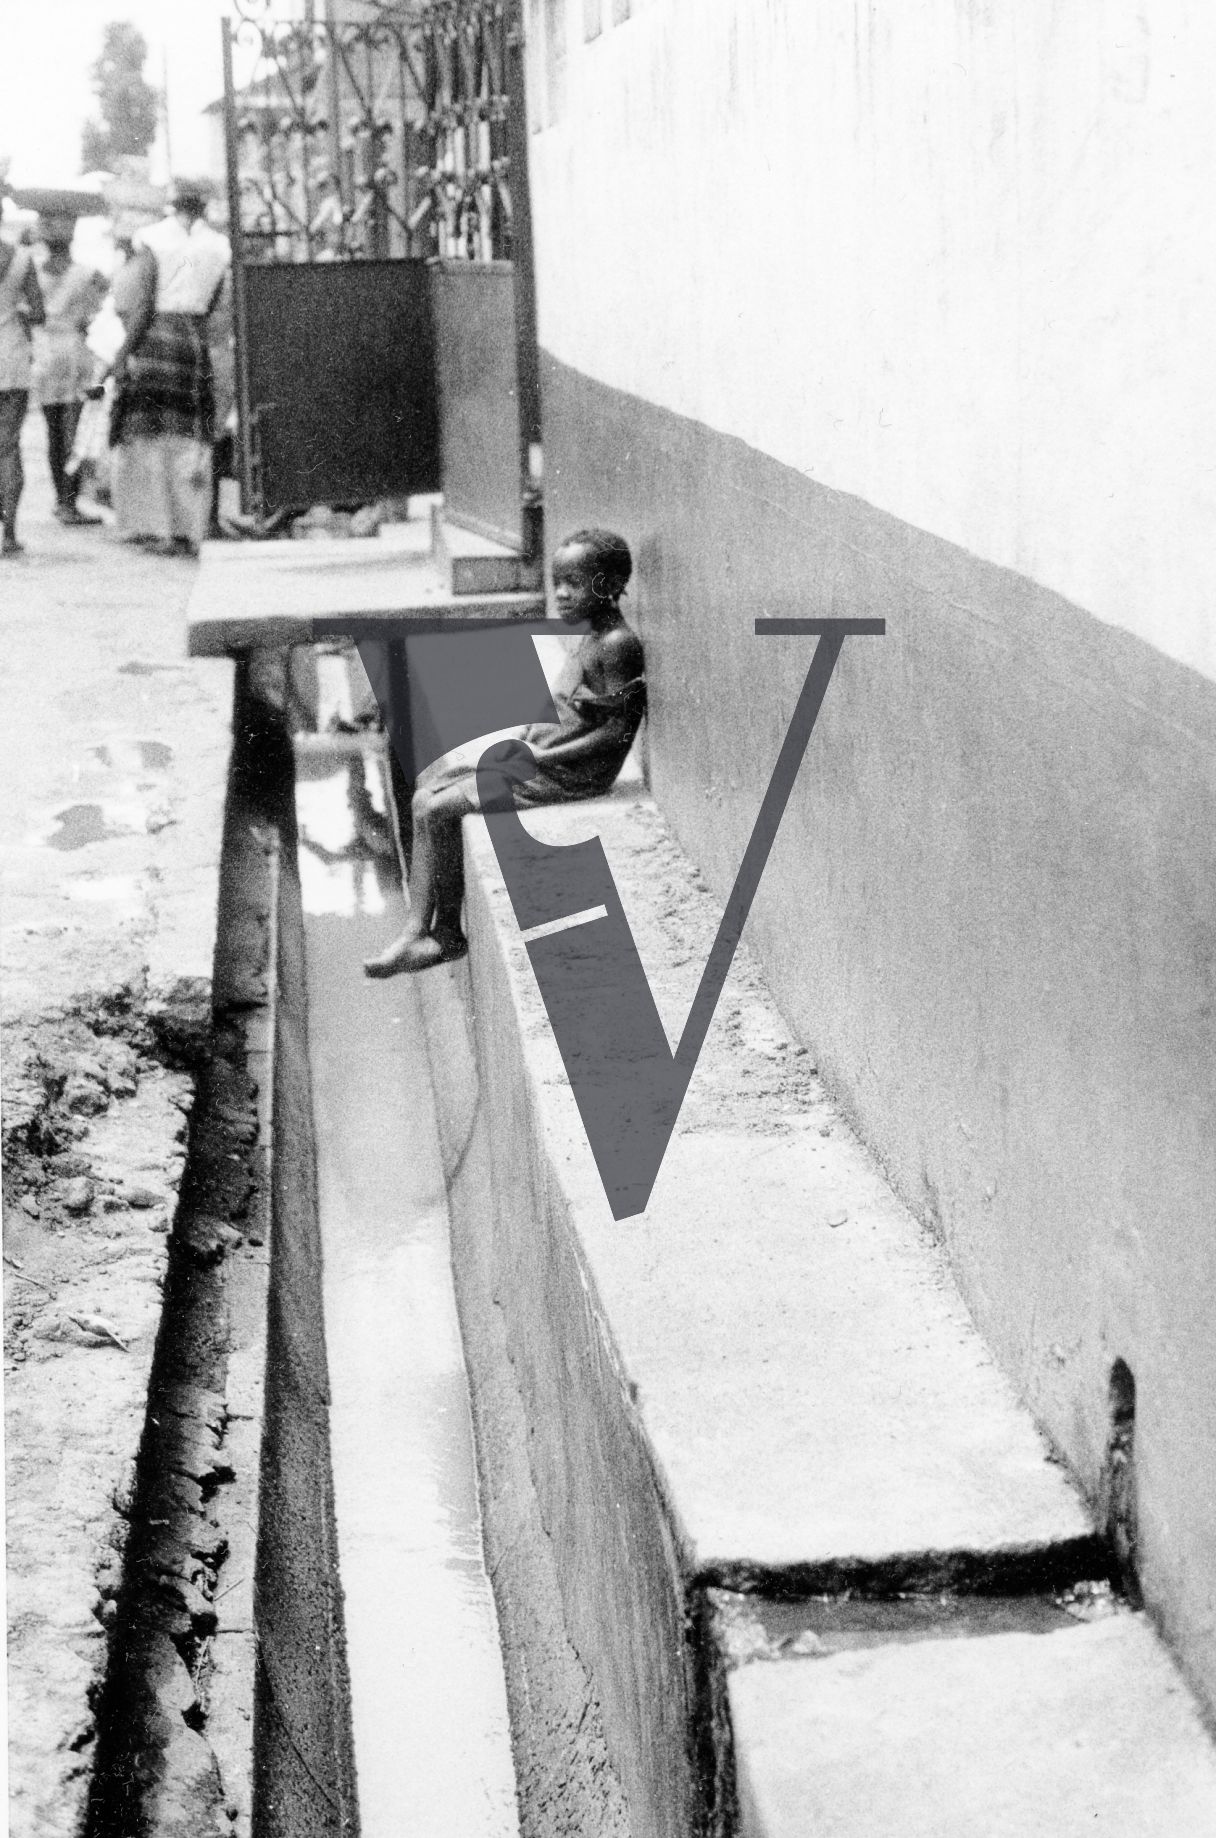 Sierra Leone, streets, small child alone on wall.